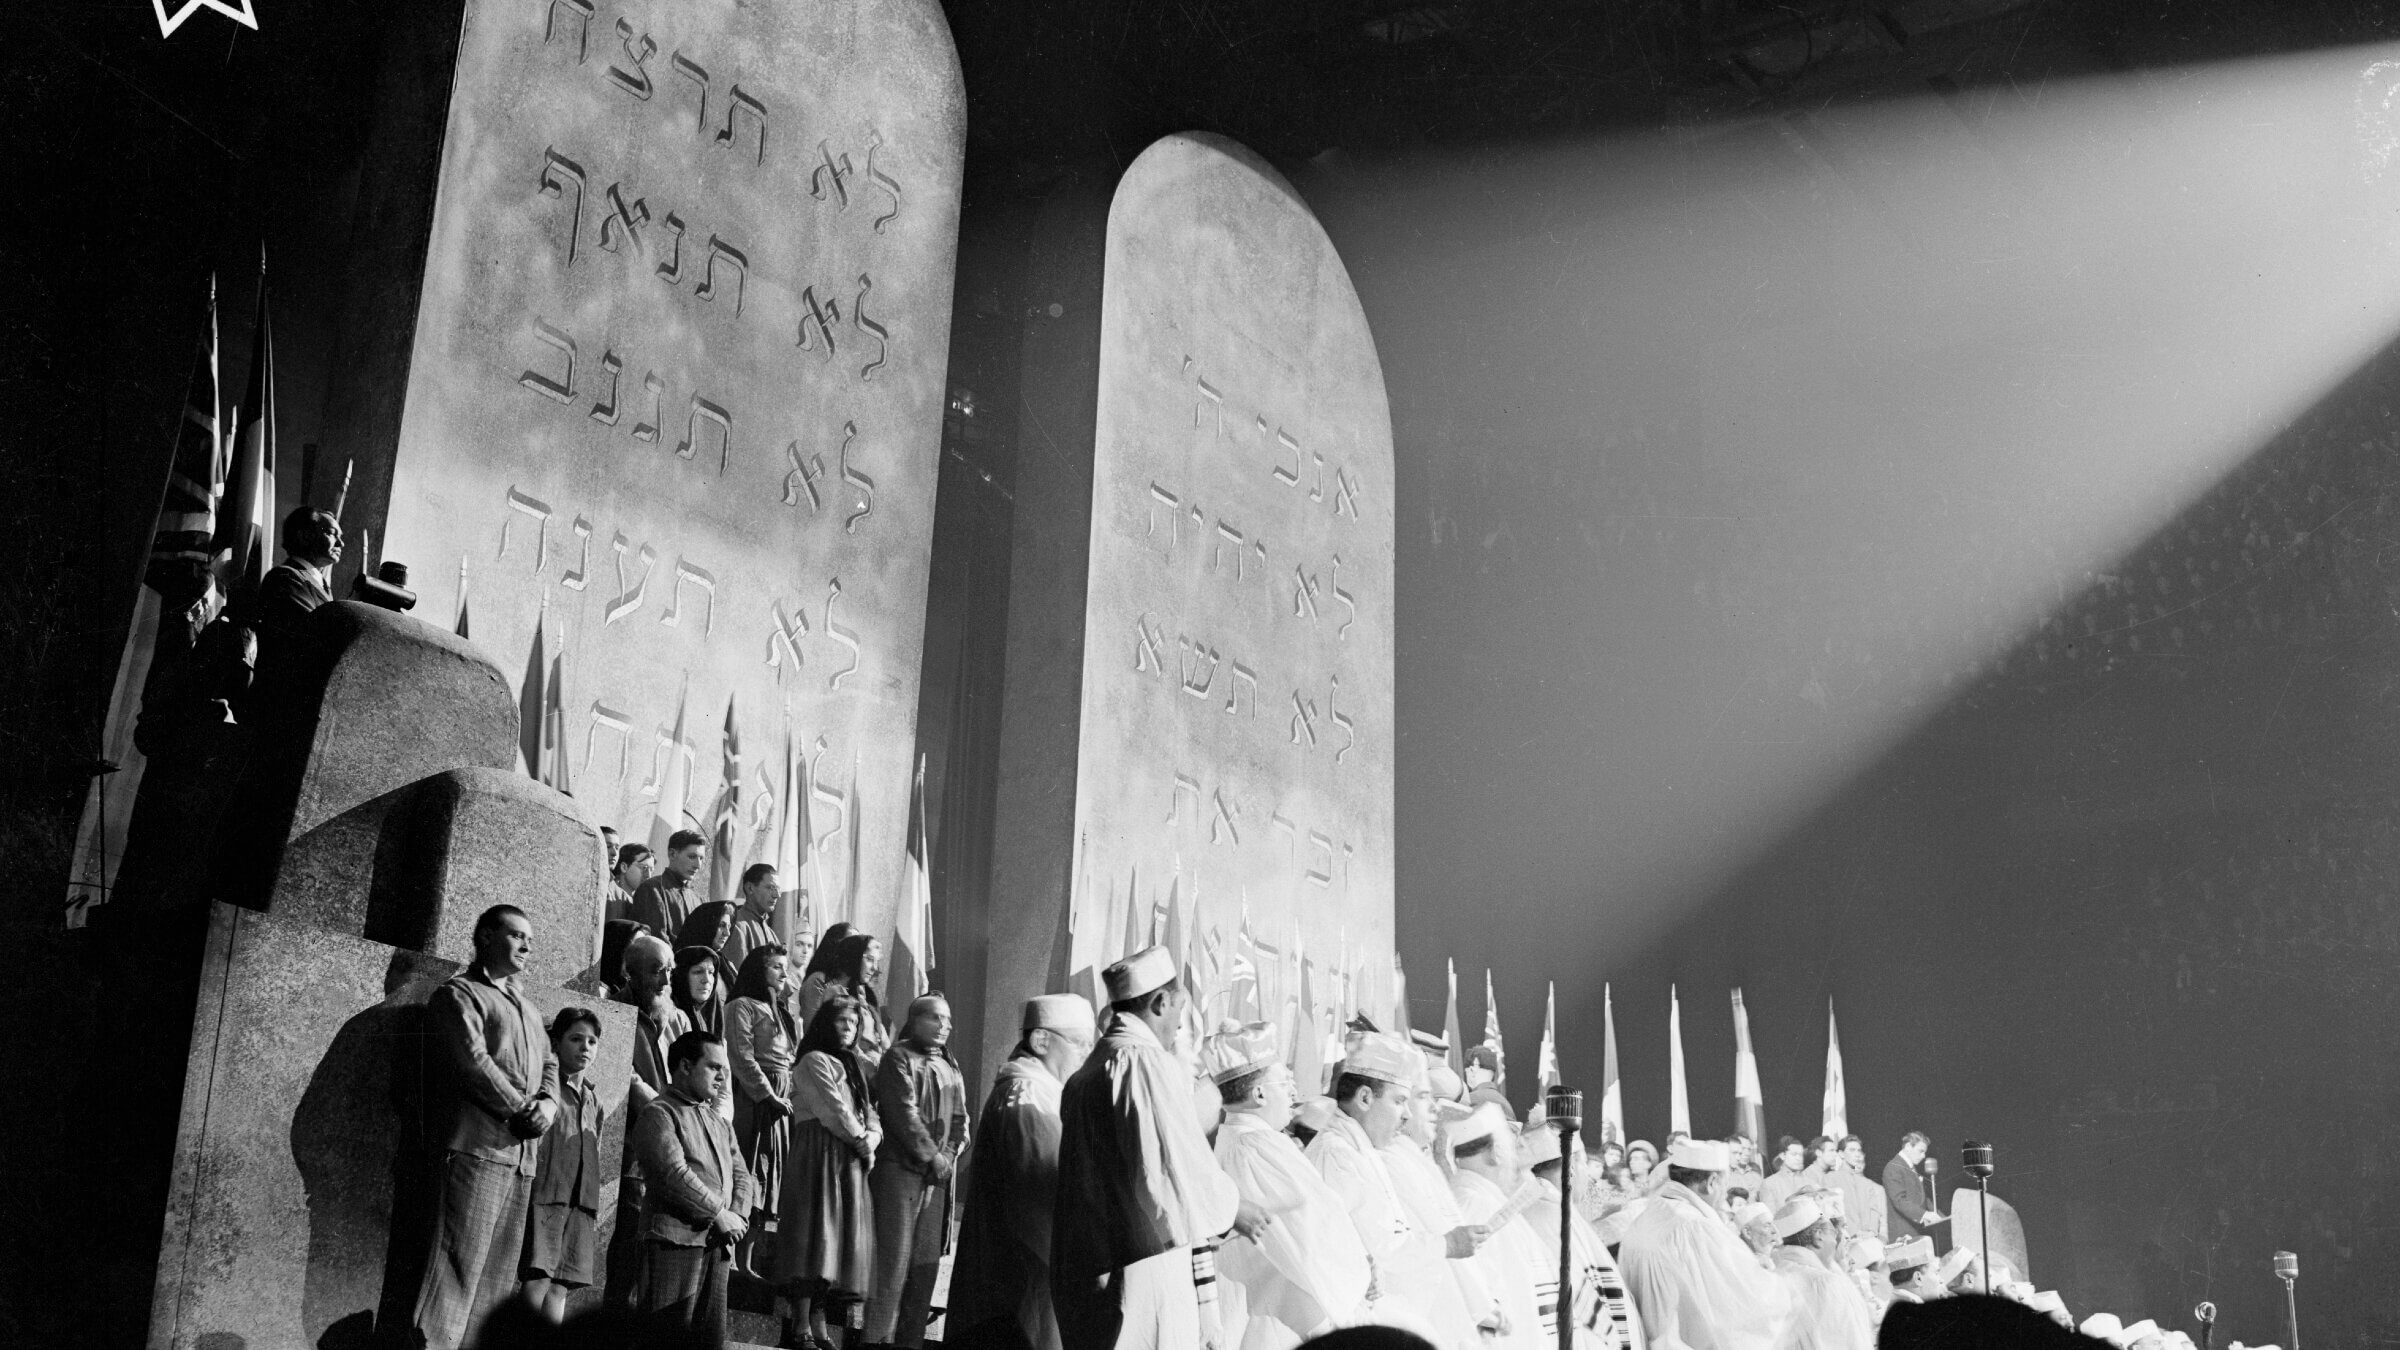 In the final scene of "We Will Never Die" at Madison Square Garden in March of 1943, cantors sing kaddish for the 2 million Jews who had already died in the Holocaust. 